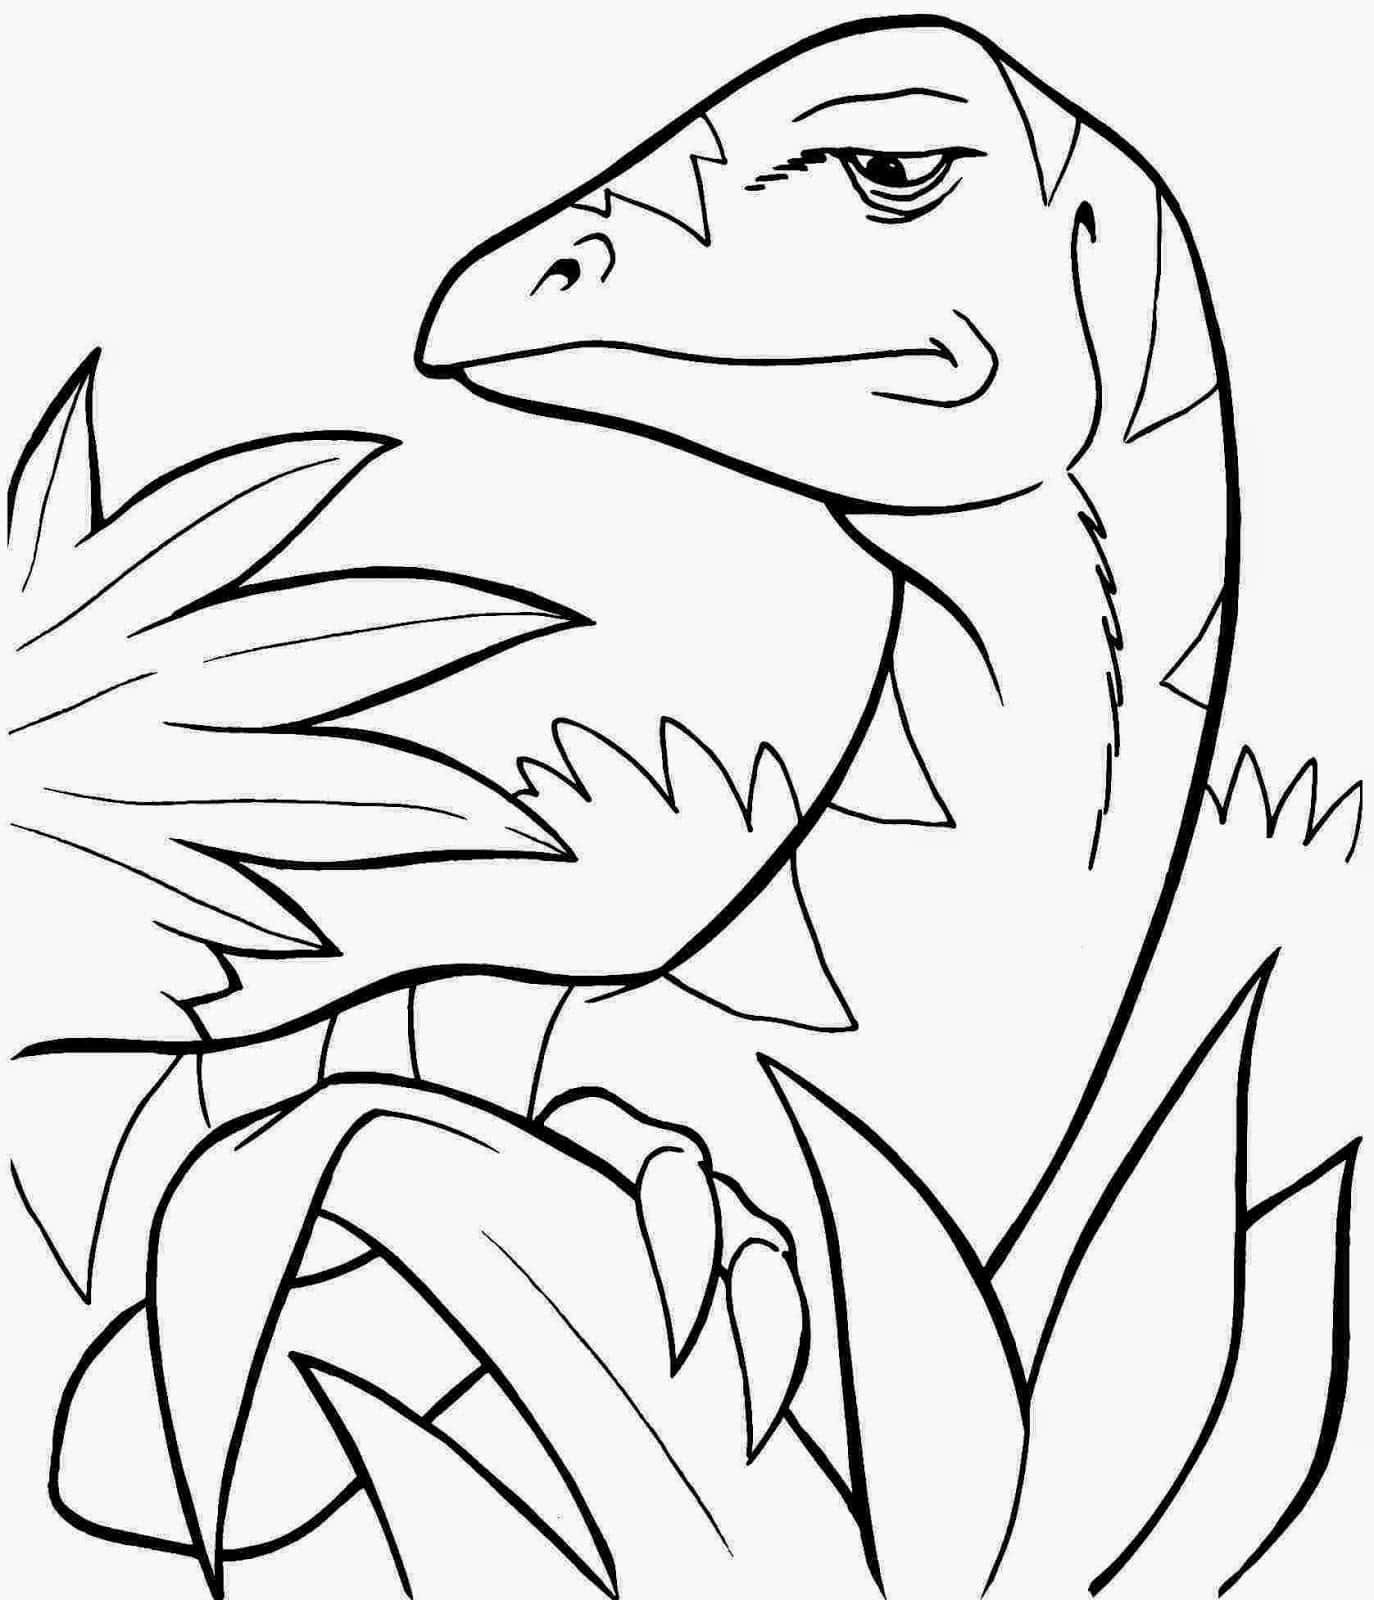 A Dinosaur Coloring Page With A Leaf In The Background